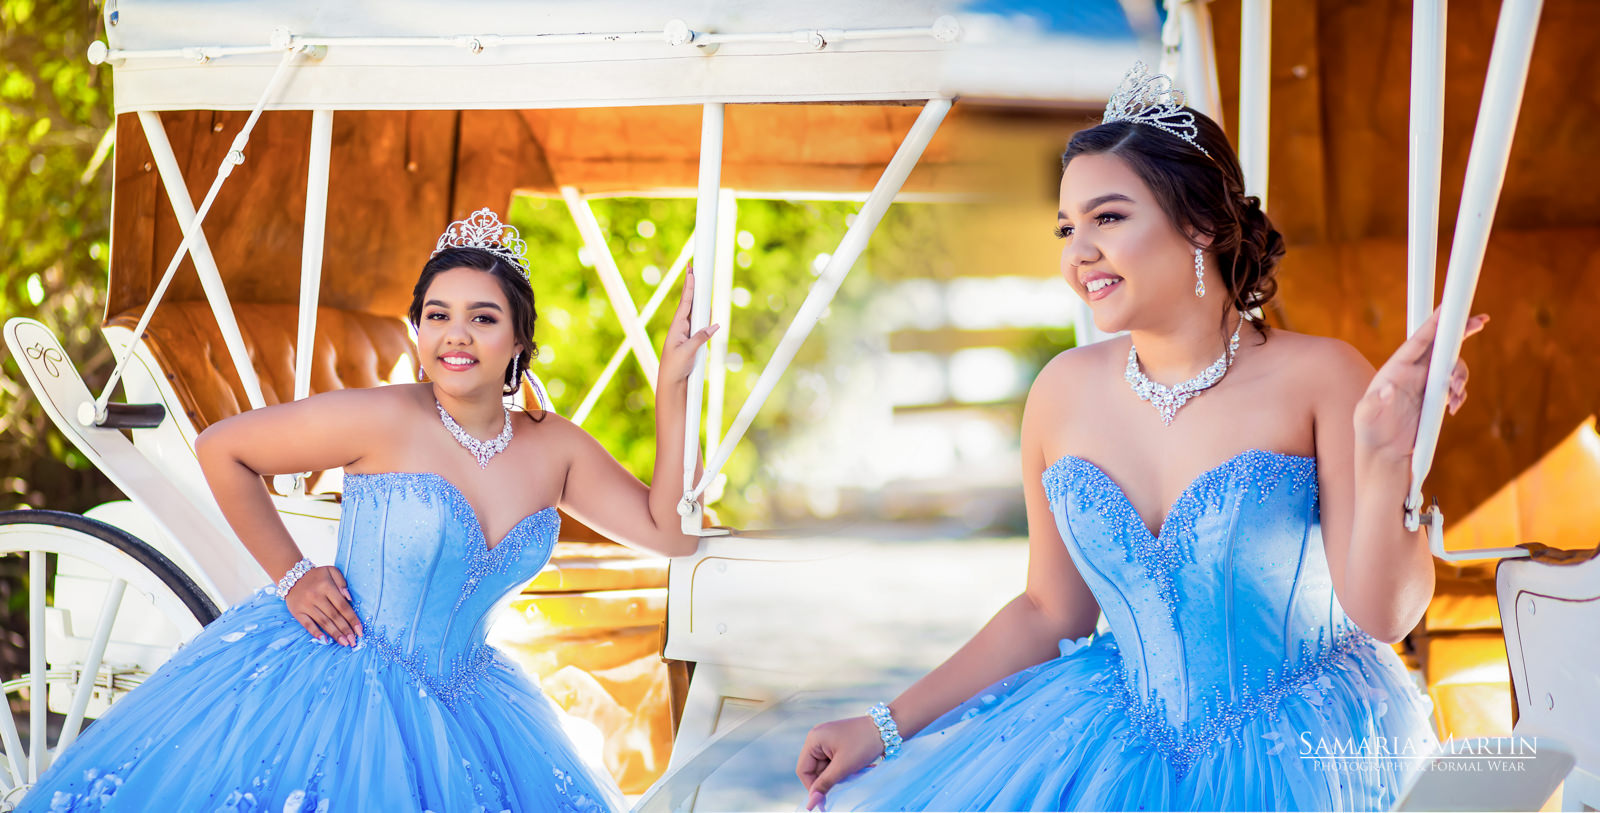 Fashion photoshoot, best quinceanera pictures in Miami, Samaria Martin Photographer, where to rent quinceanera dresses, quinceanera collection 3